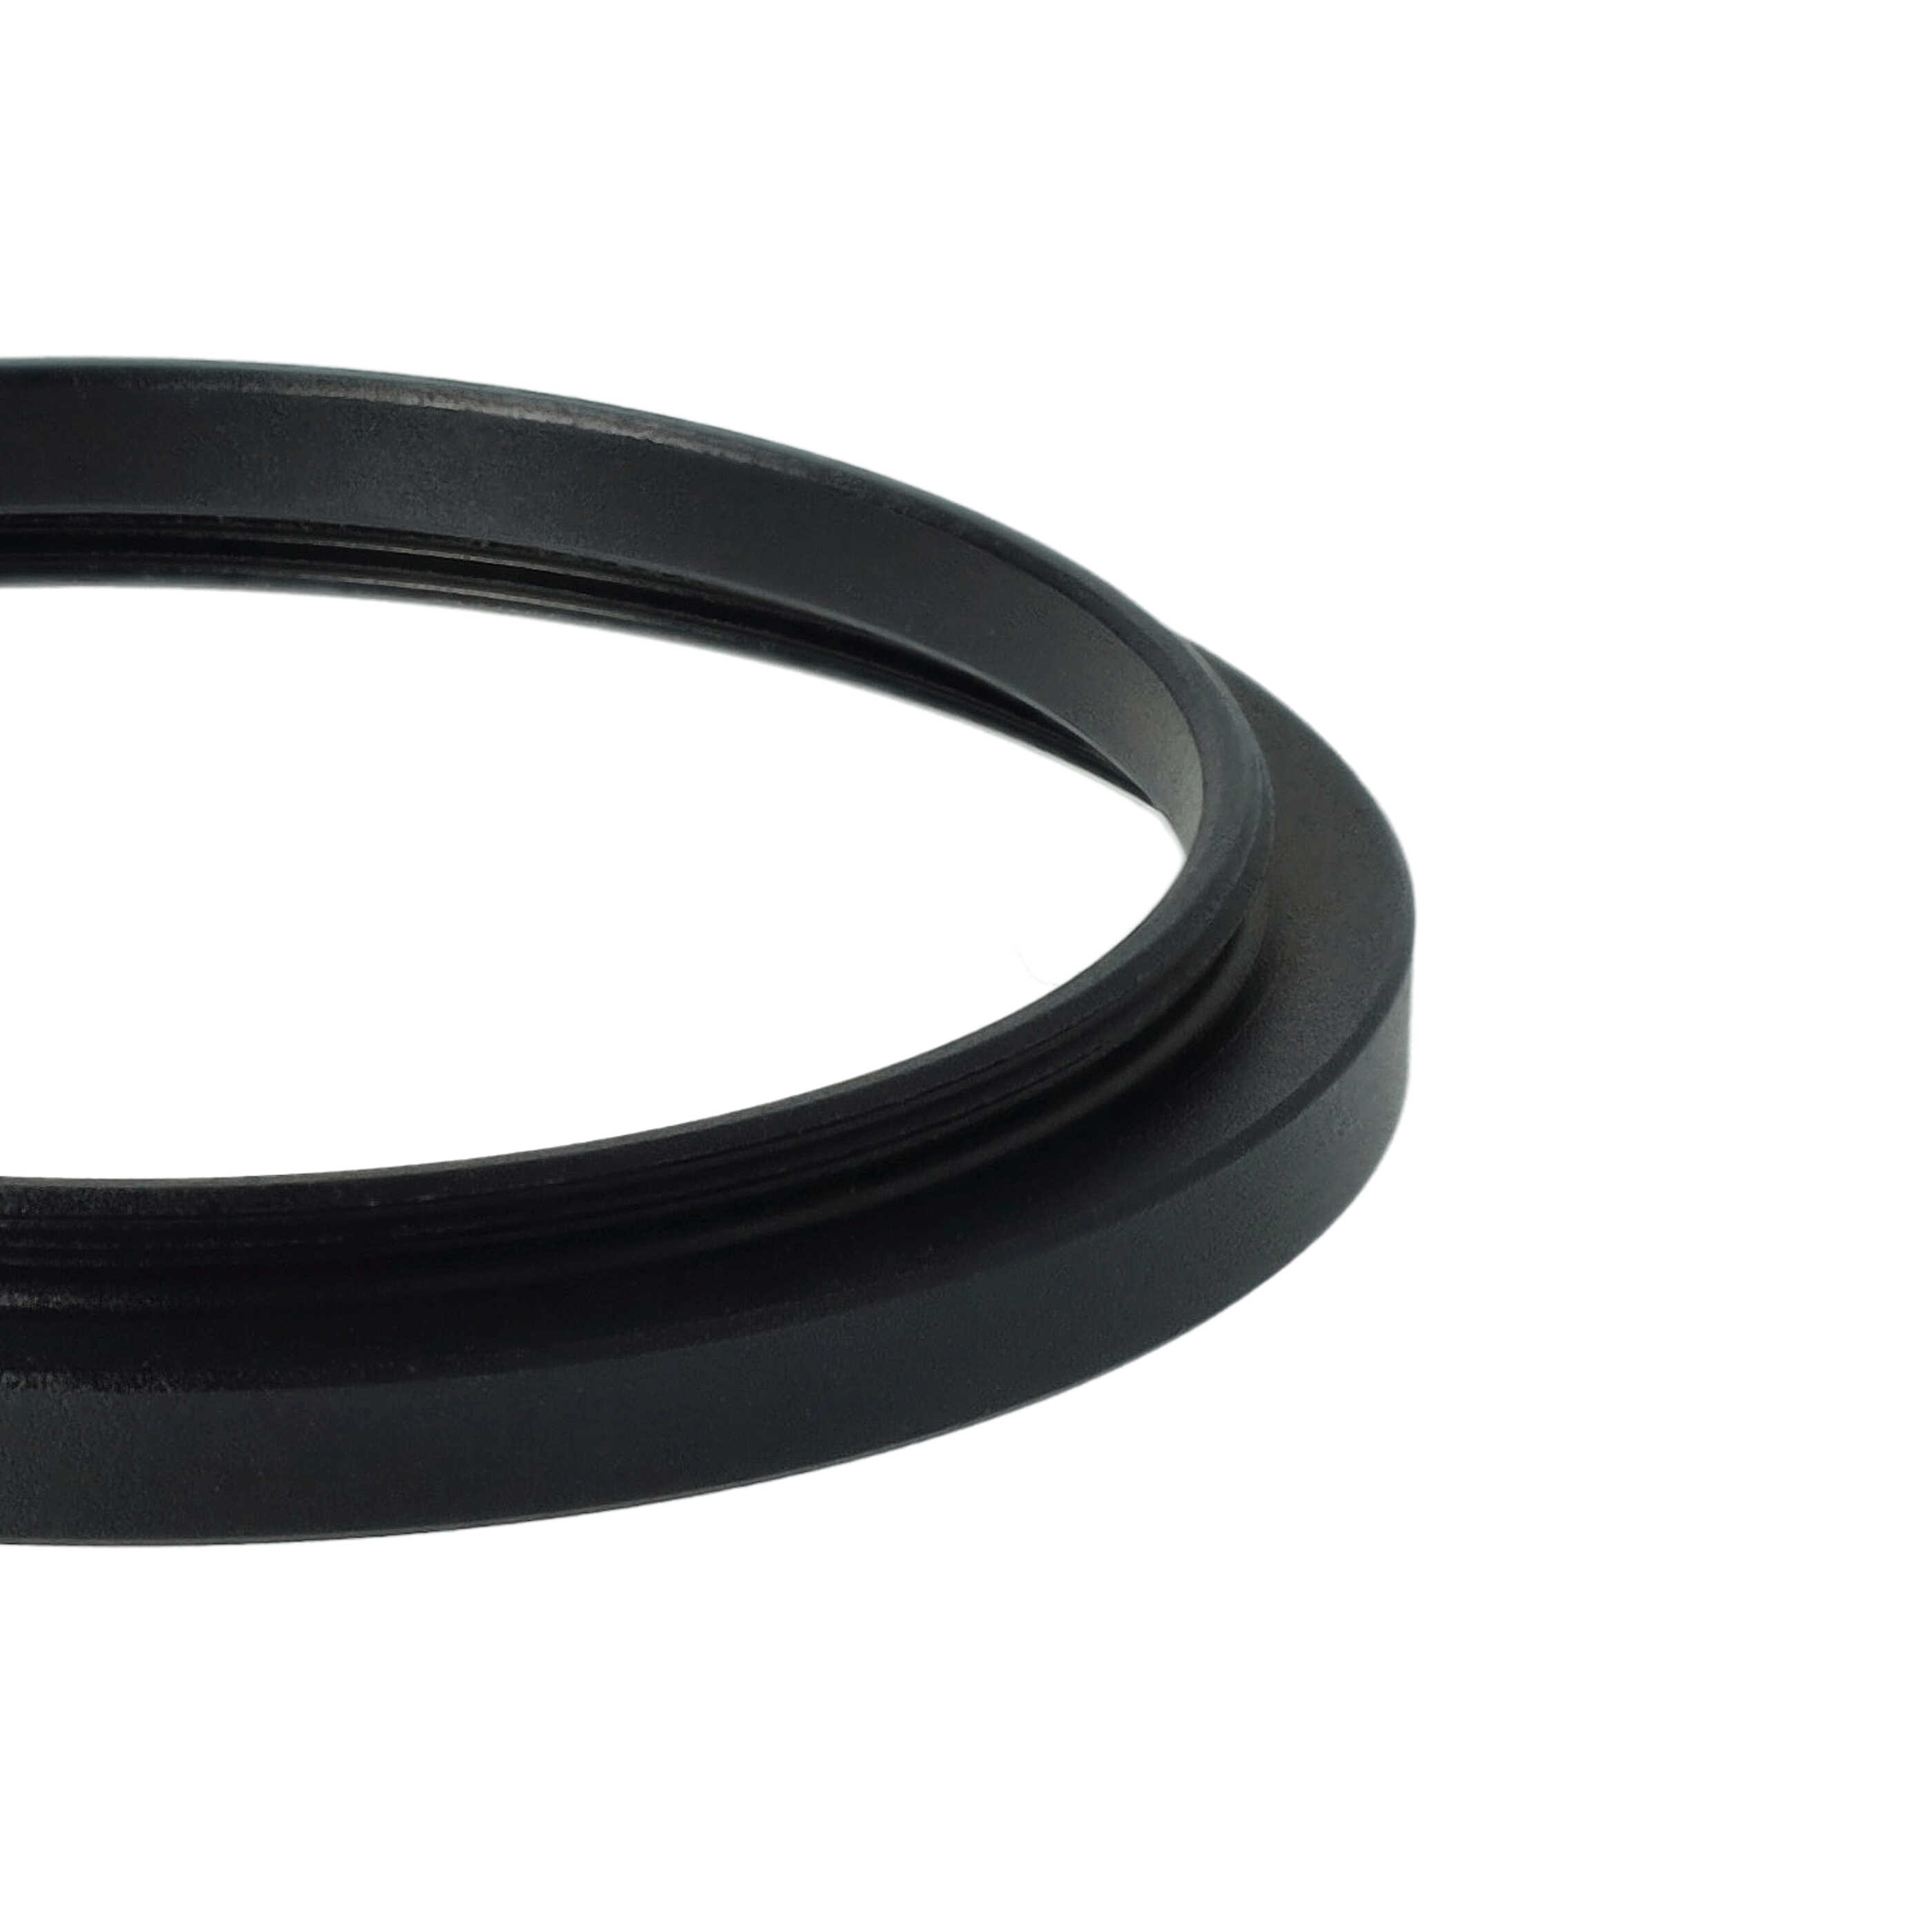 Step-Up Ring Adapter of 46 mm to 49 mmfor various Camera Lens - Filter Adapter